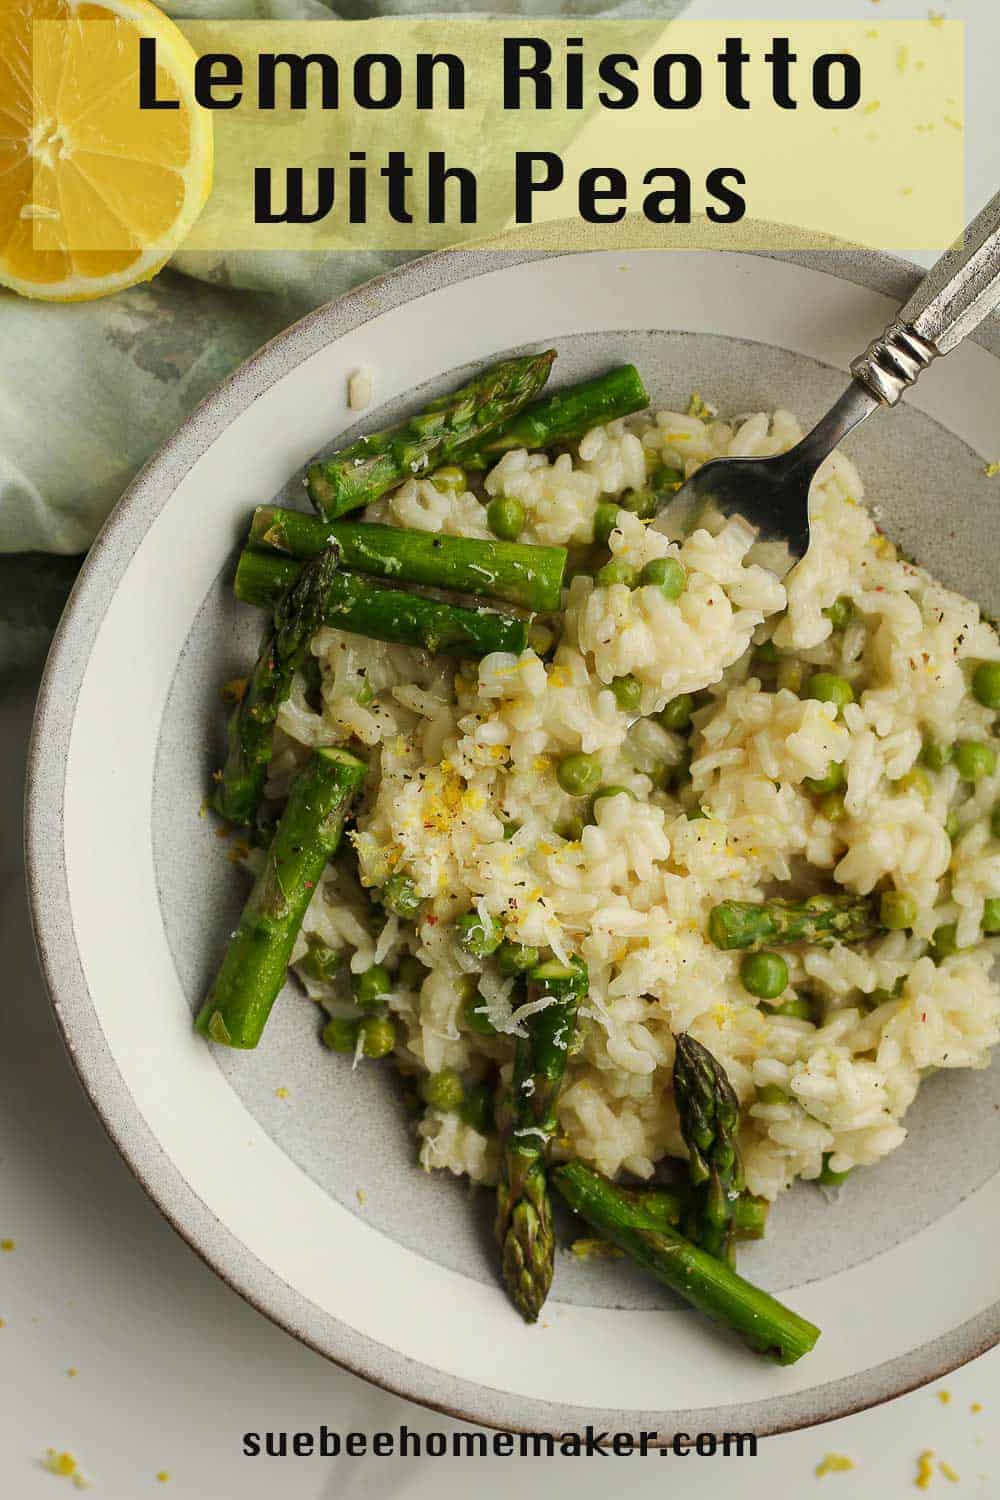 A bowl of lemon risotto with peas, with a fork.